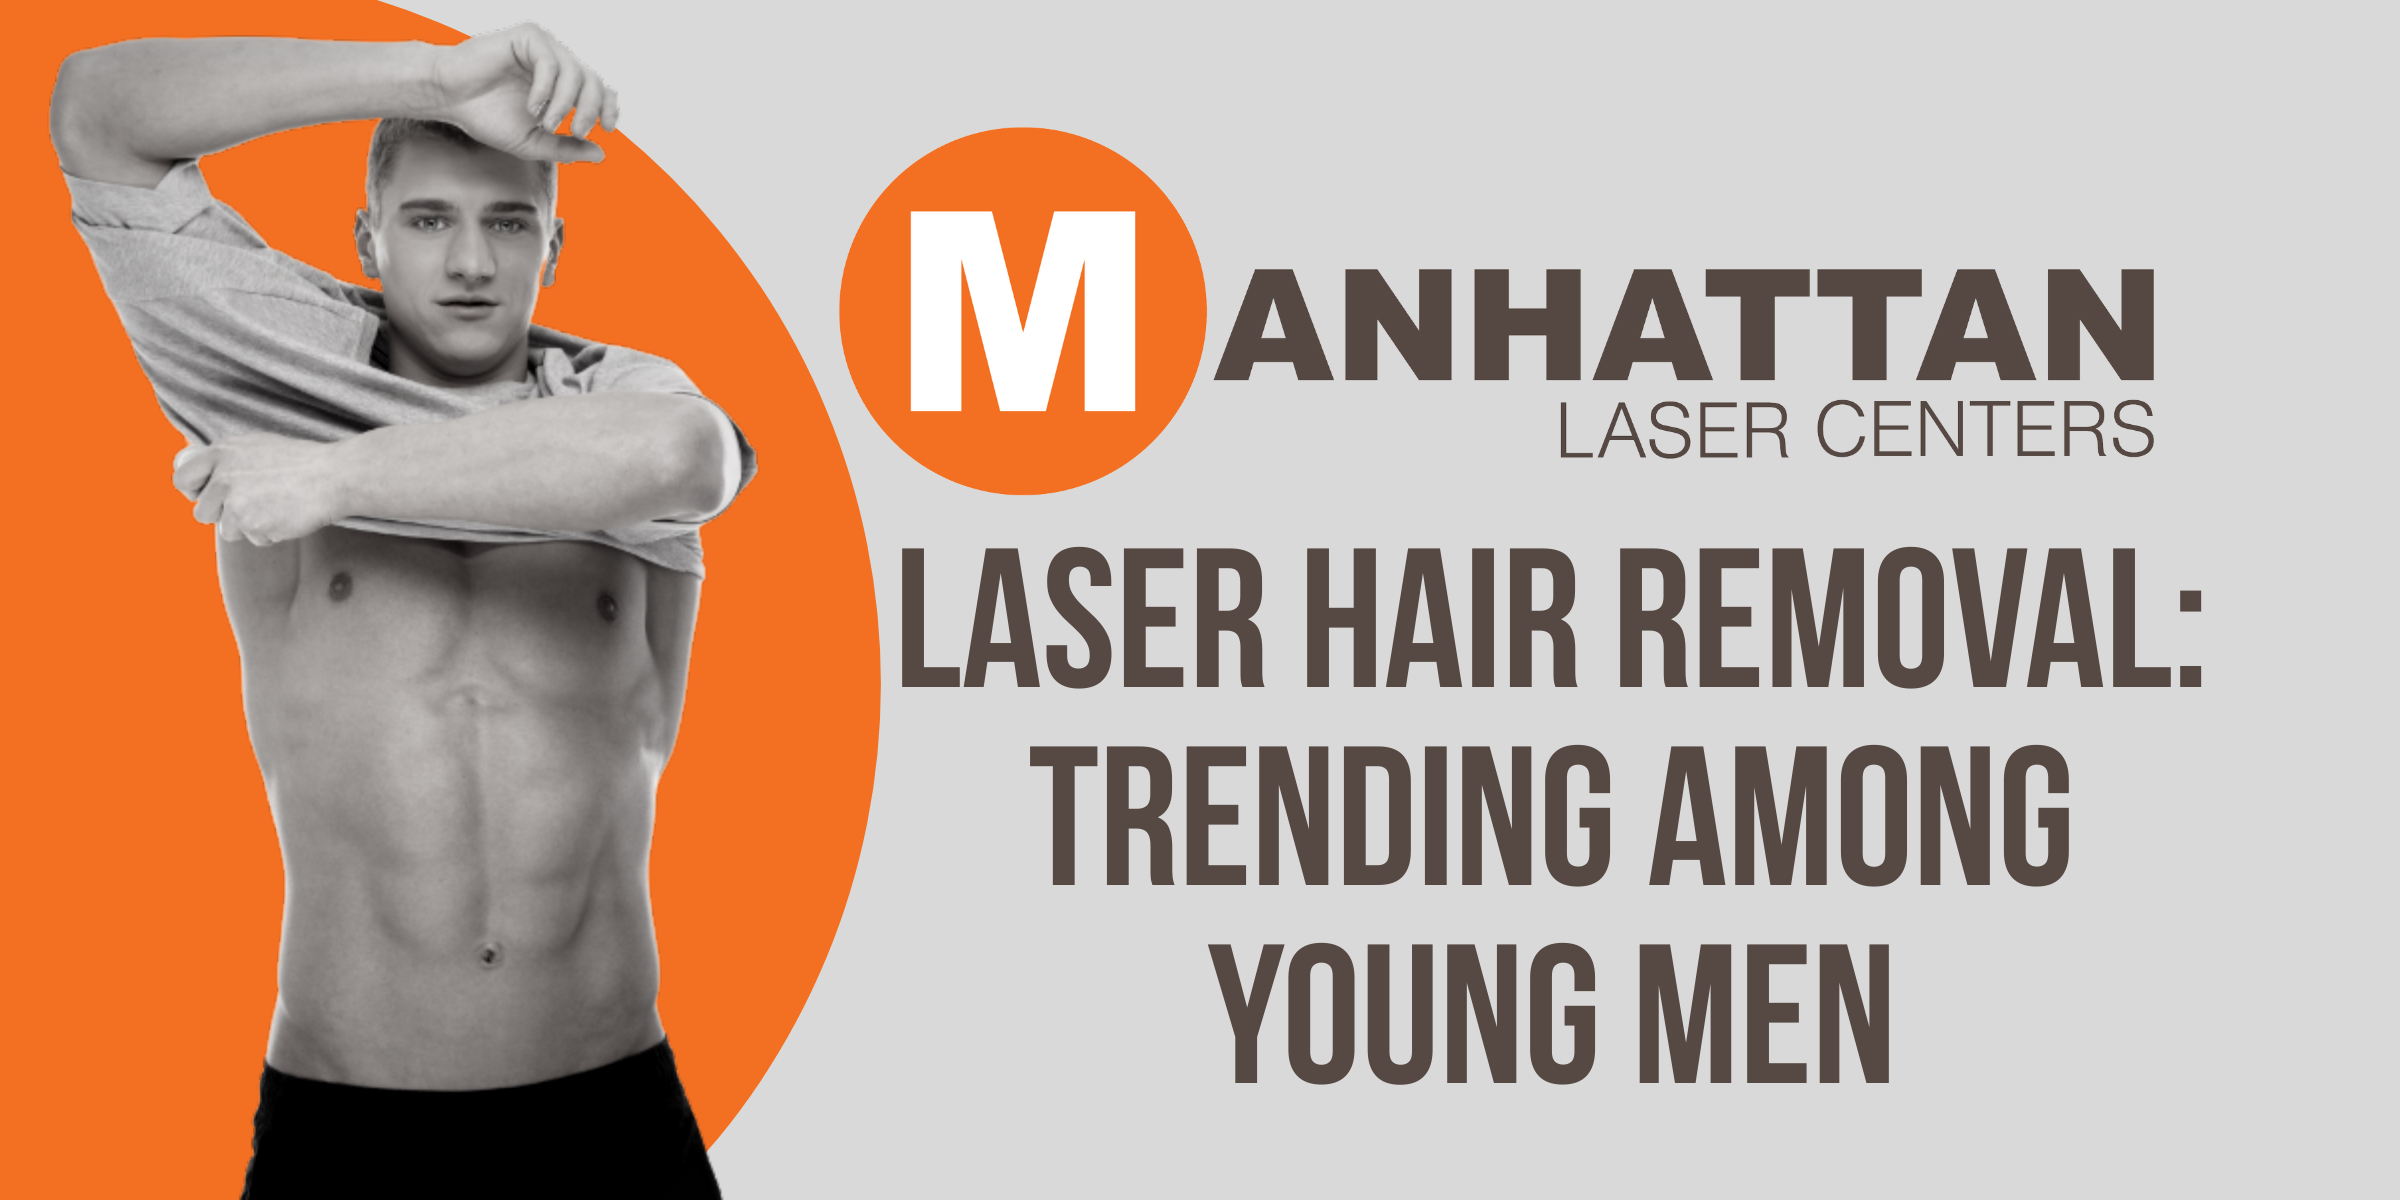 Laser Hair Removal: Trending Among Young Men